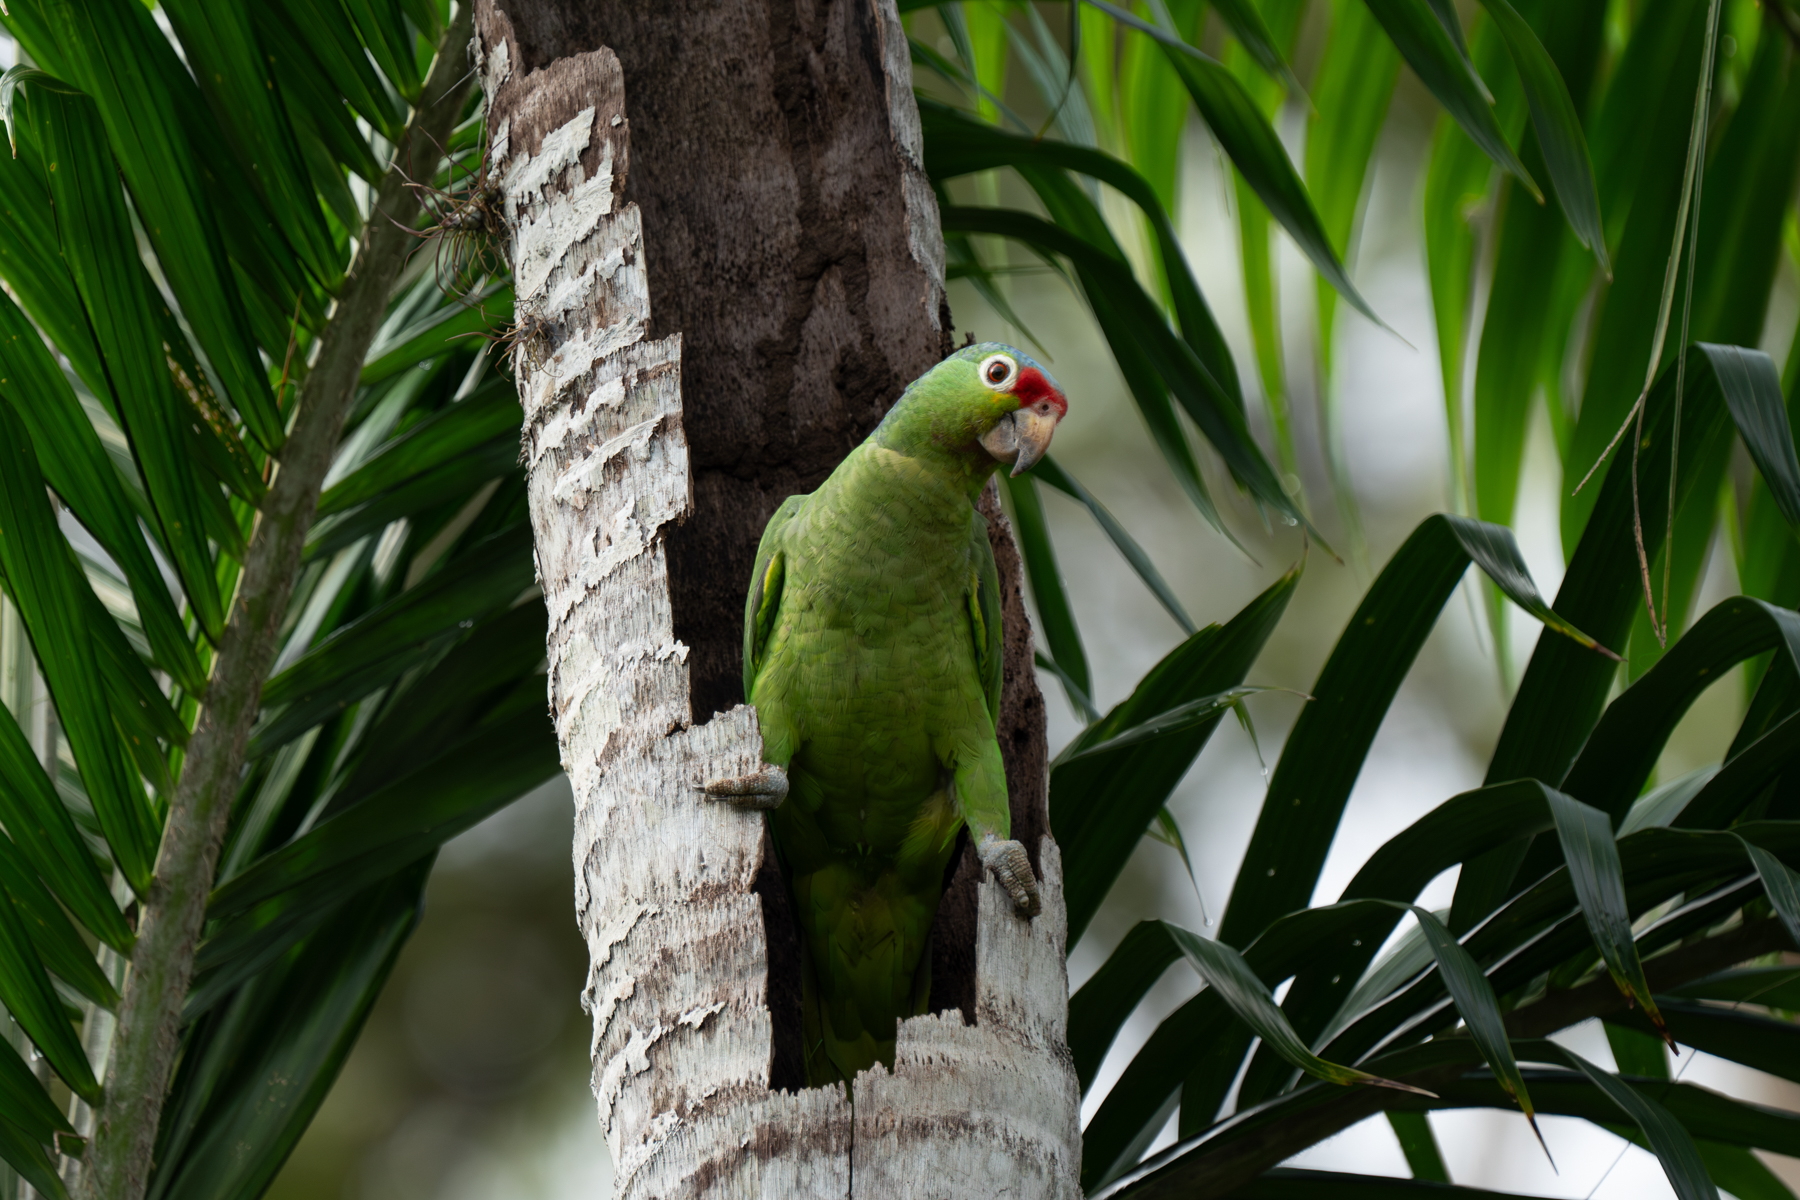 Red-lored Parrot at its nesting cavity (image by Inger Vandyke)